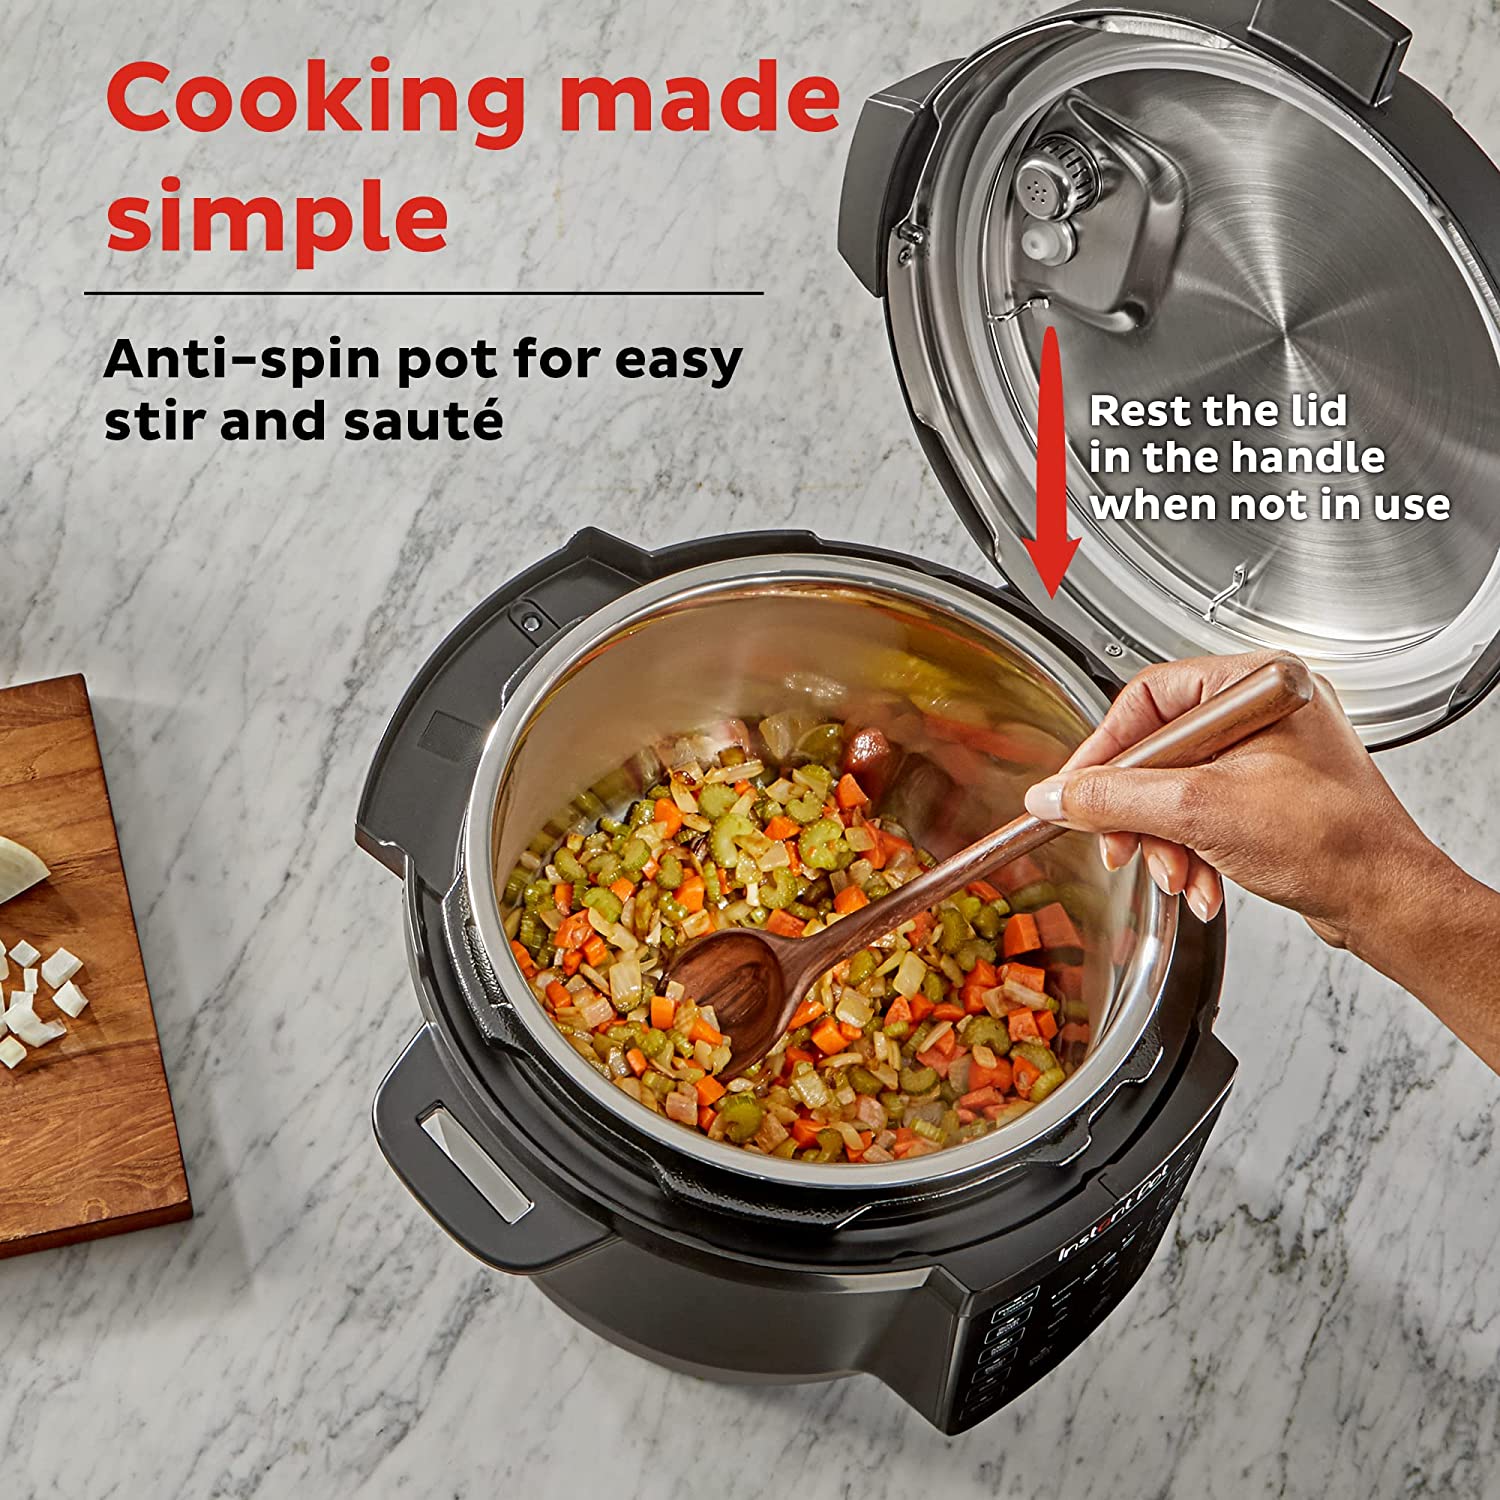 Instant Pot Duo 7-in-1 Electric Pressure Cooker, Slow Cooker, Rice